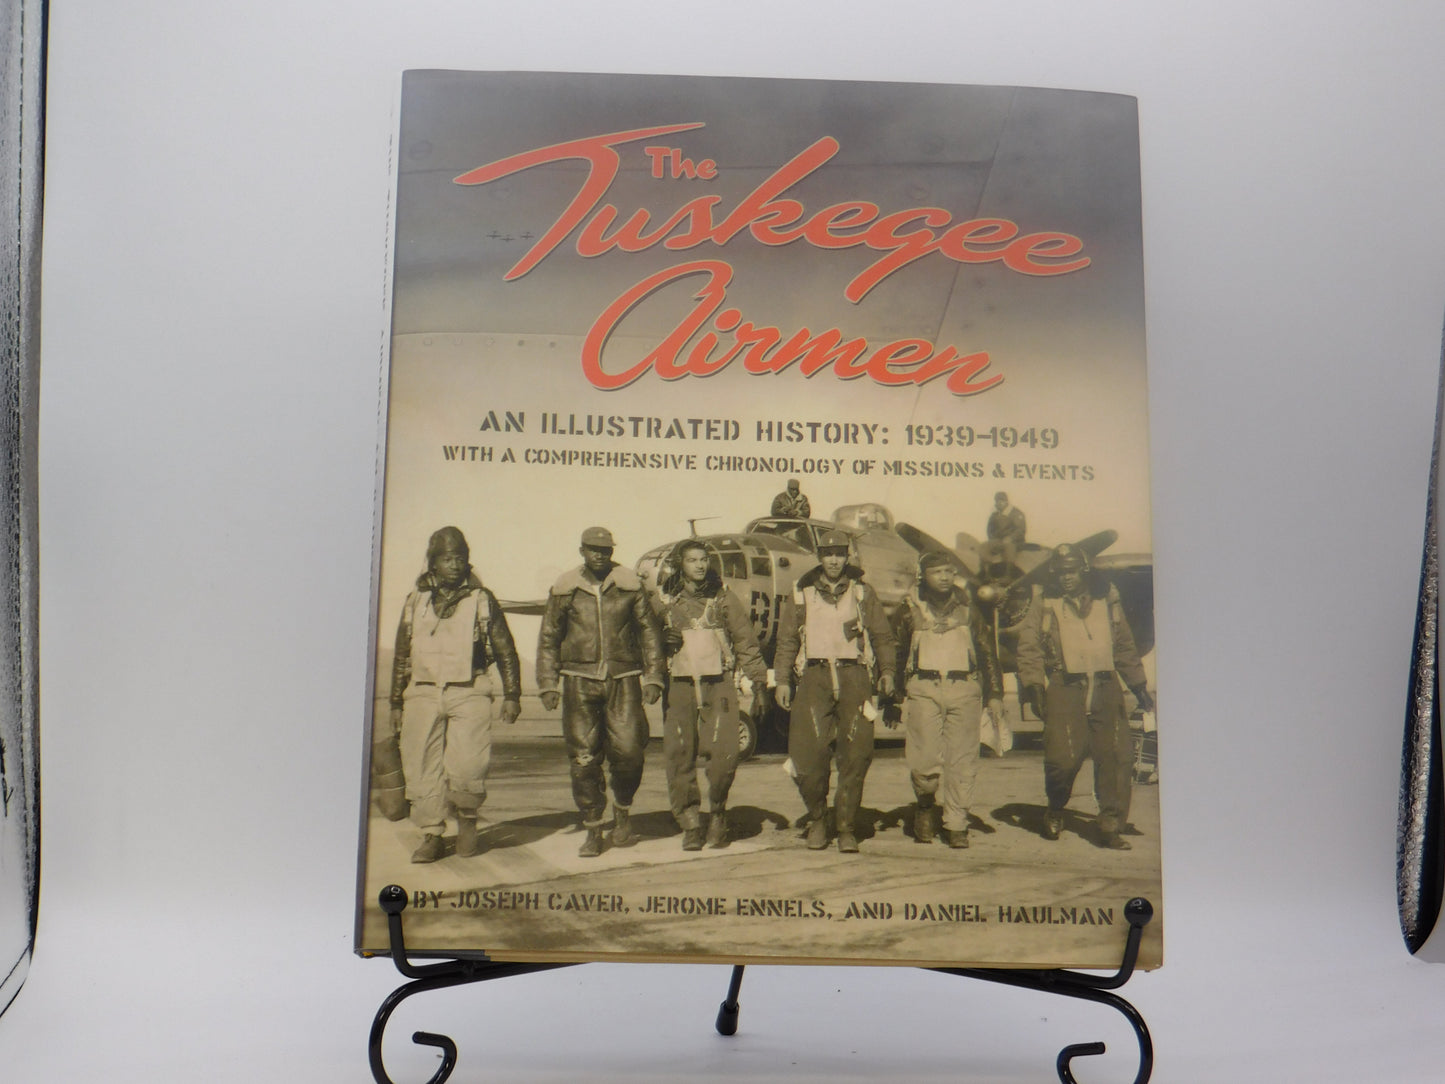 The Tuskegee Airmen: An Illustrated History: 1939-1949 with a Comprehensive Chronology of Missions and Events by Joseph Caver